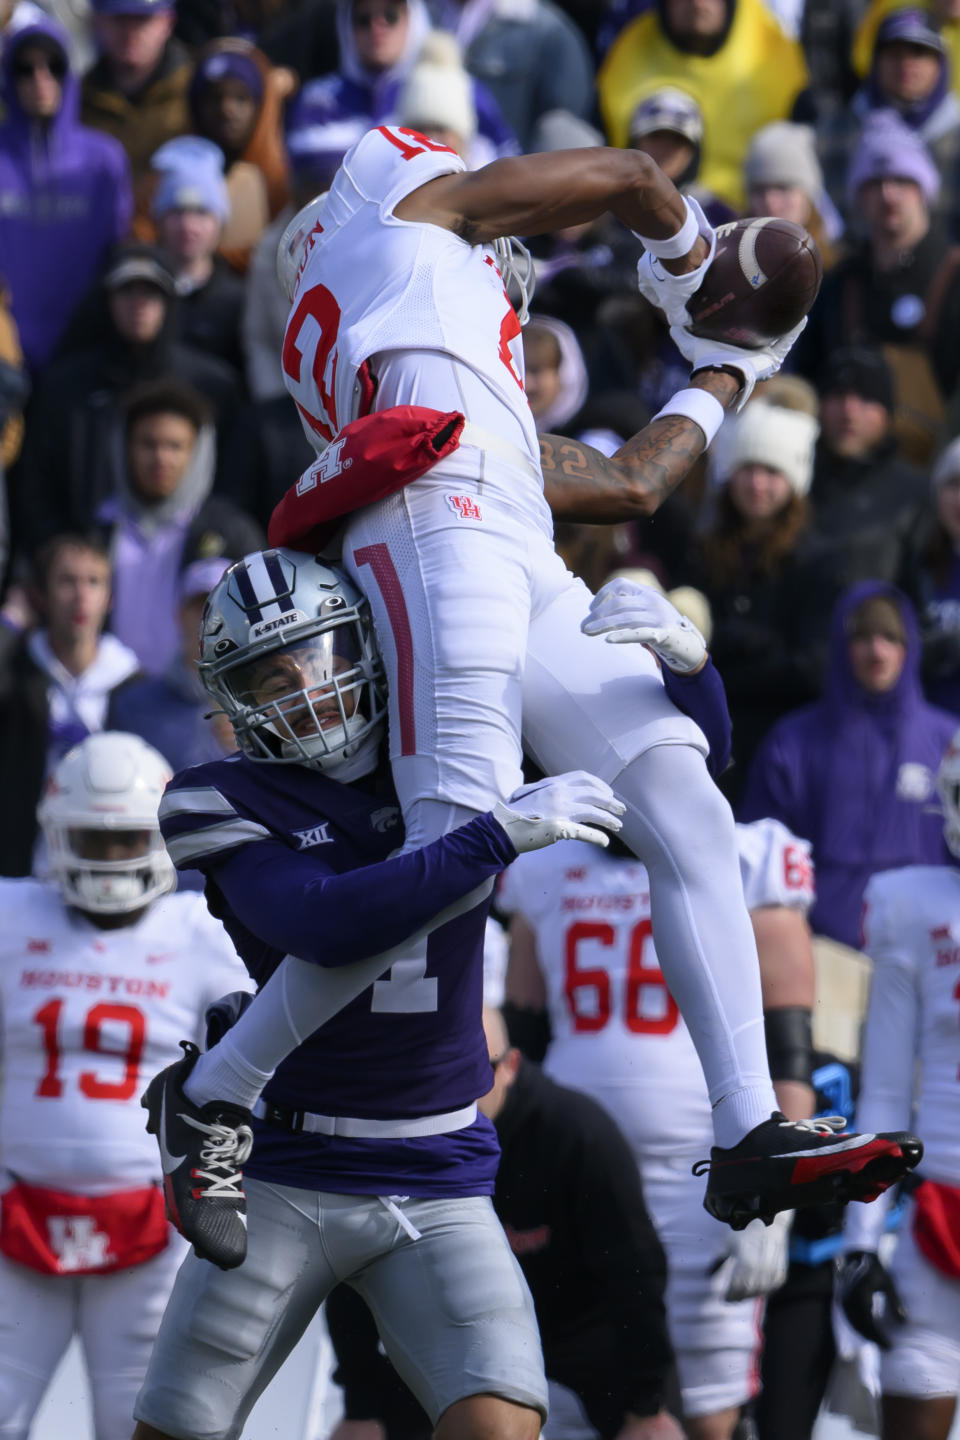 Kansas State cornerback Keenan Garber (1) tackles Houston wide receiver Stephon Johnson (12) as he makes a catch during the second half of an NCAA college football game in Manhattan, Kan., Saturday, Oct. 28, 2023. (AP Photo/Reed Hoffmann)